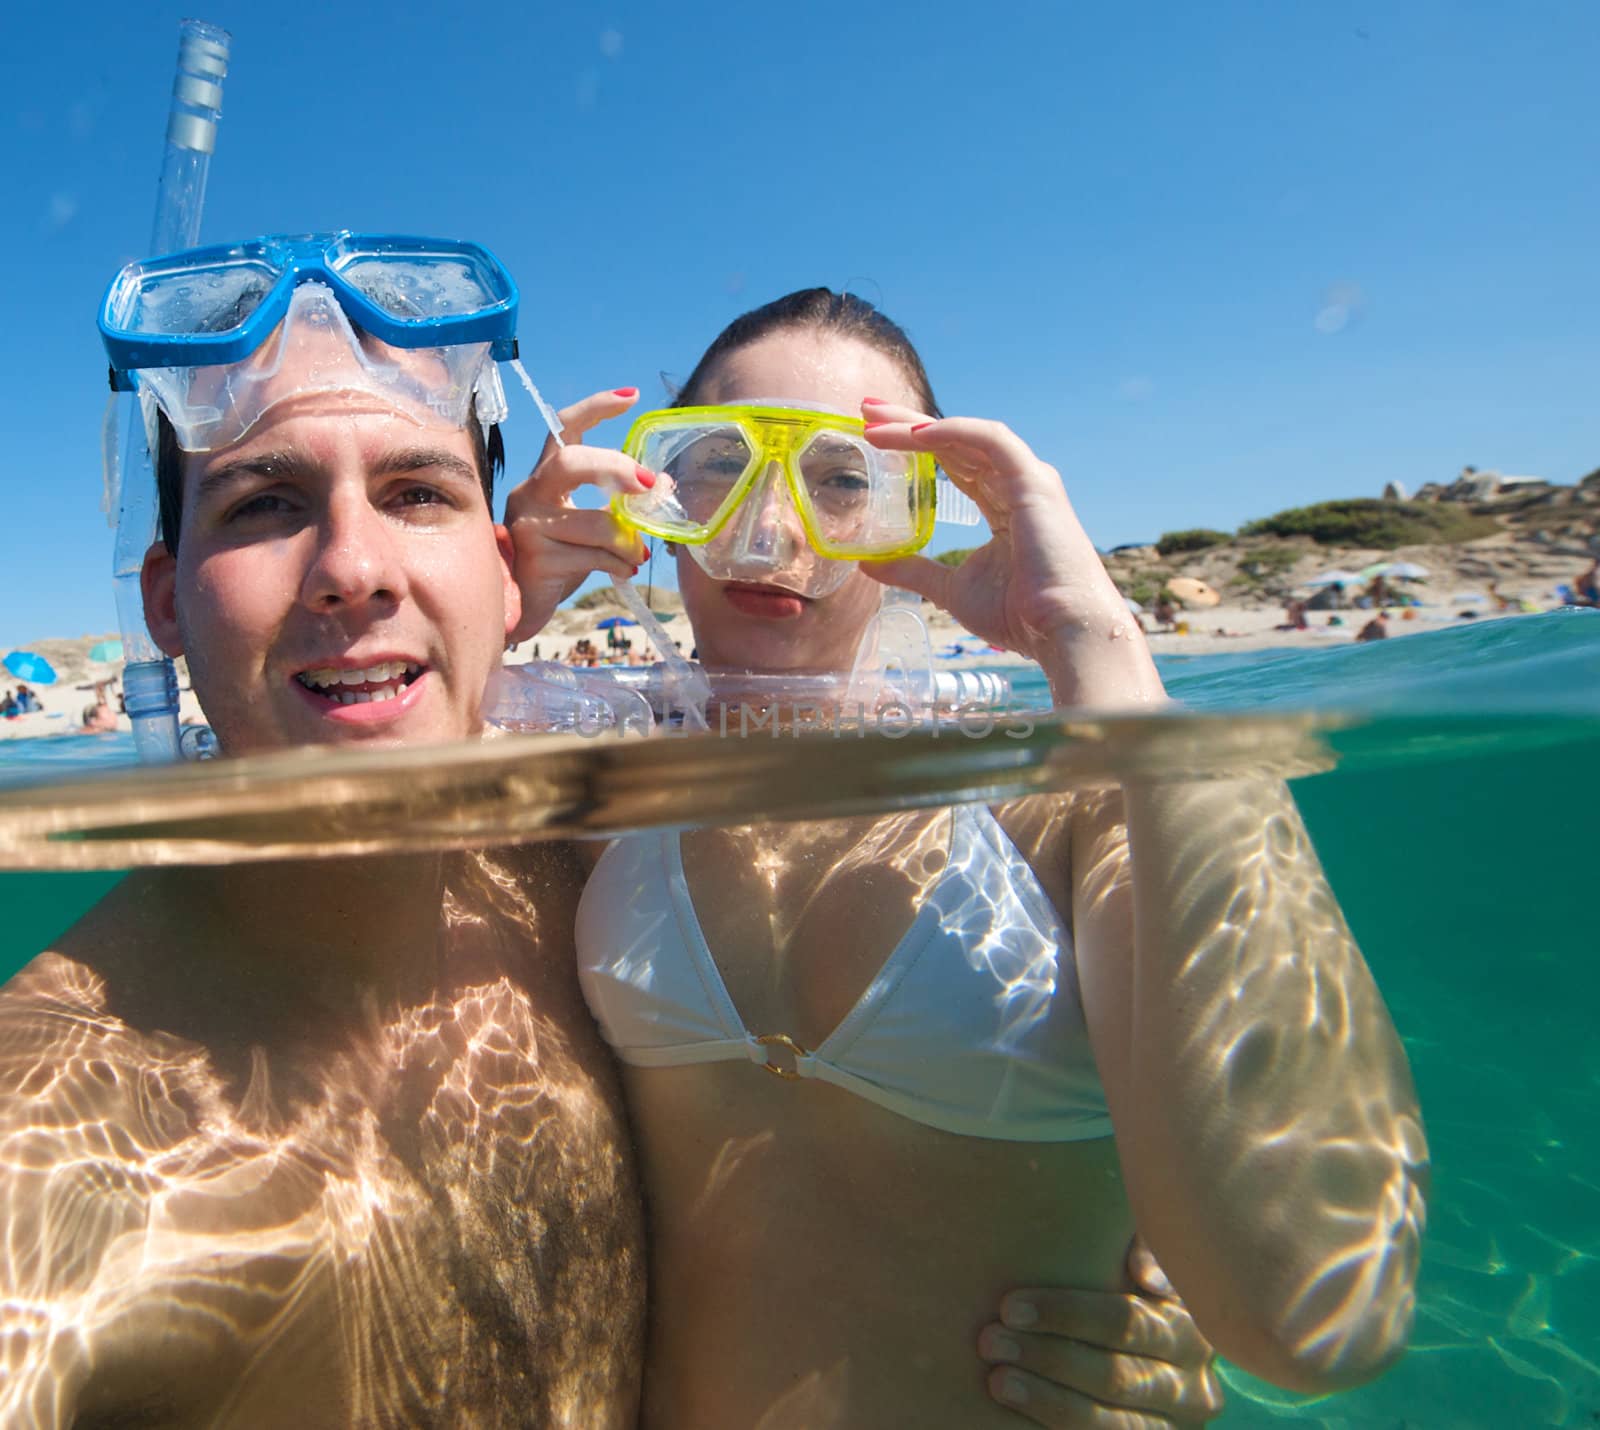 World of Snorkeling by swimnews